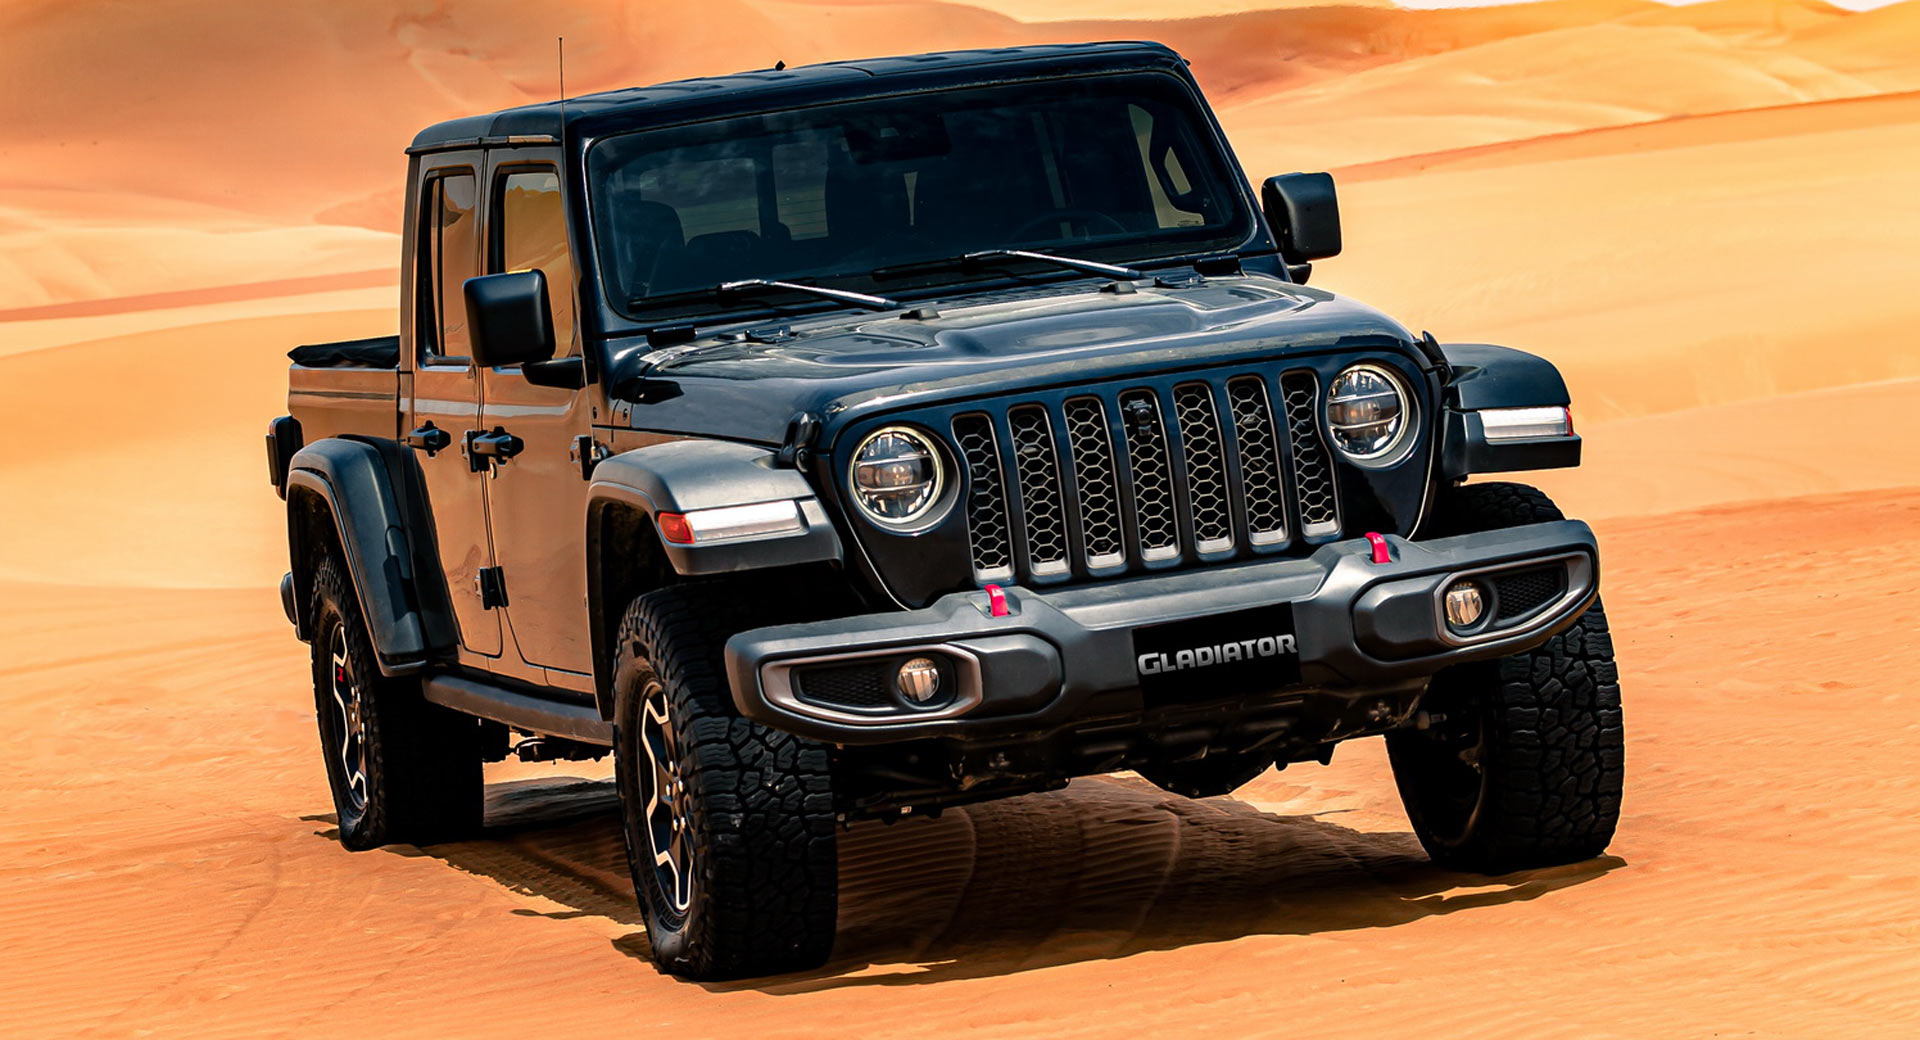 Jeep Dealers Offering Up To $9,000 Discounts On 2020 Gladiator, Claims  Report | Carscoops